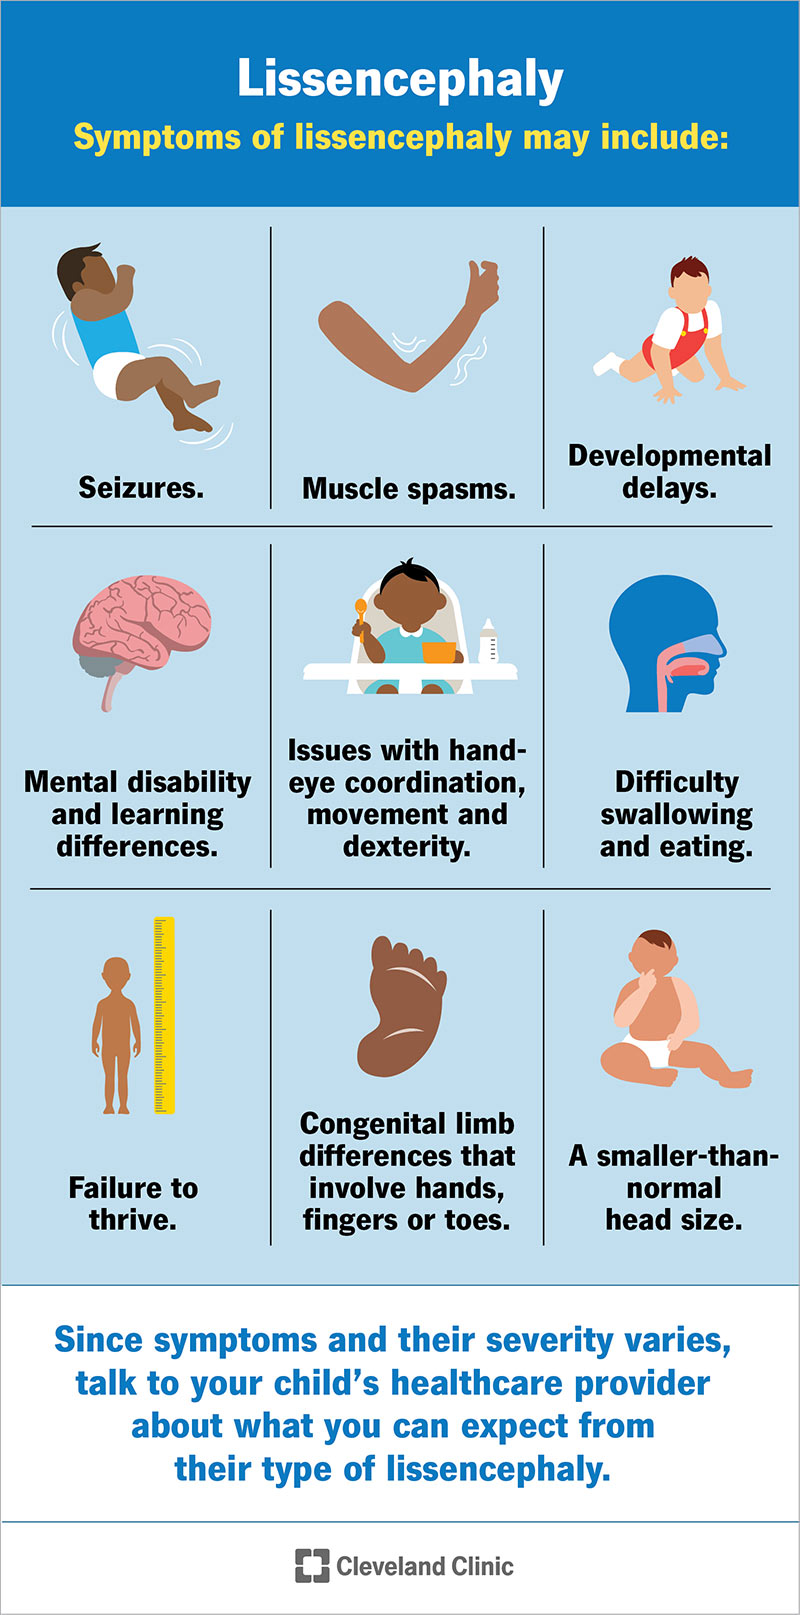 Symptoms of lissencephaly may include: seizures, muscle spasms, developmental delays, failure to thrive, smaller-than-normal head and more.